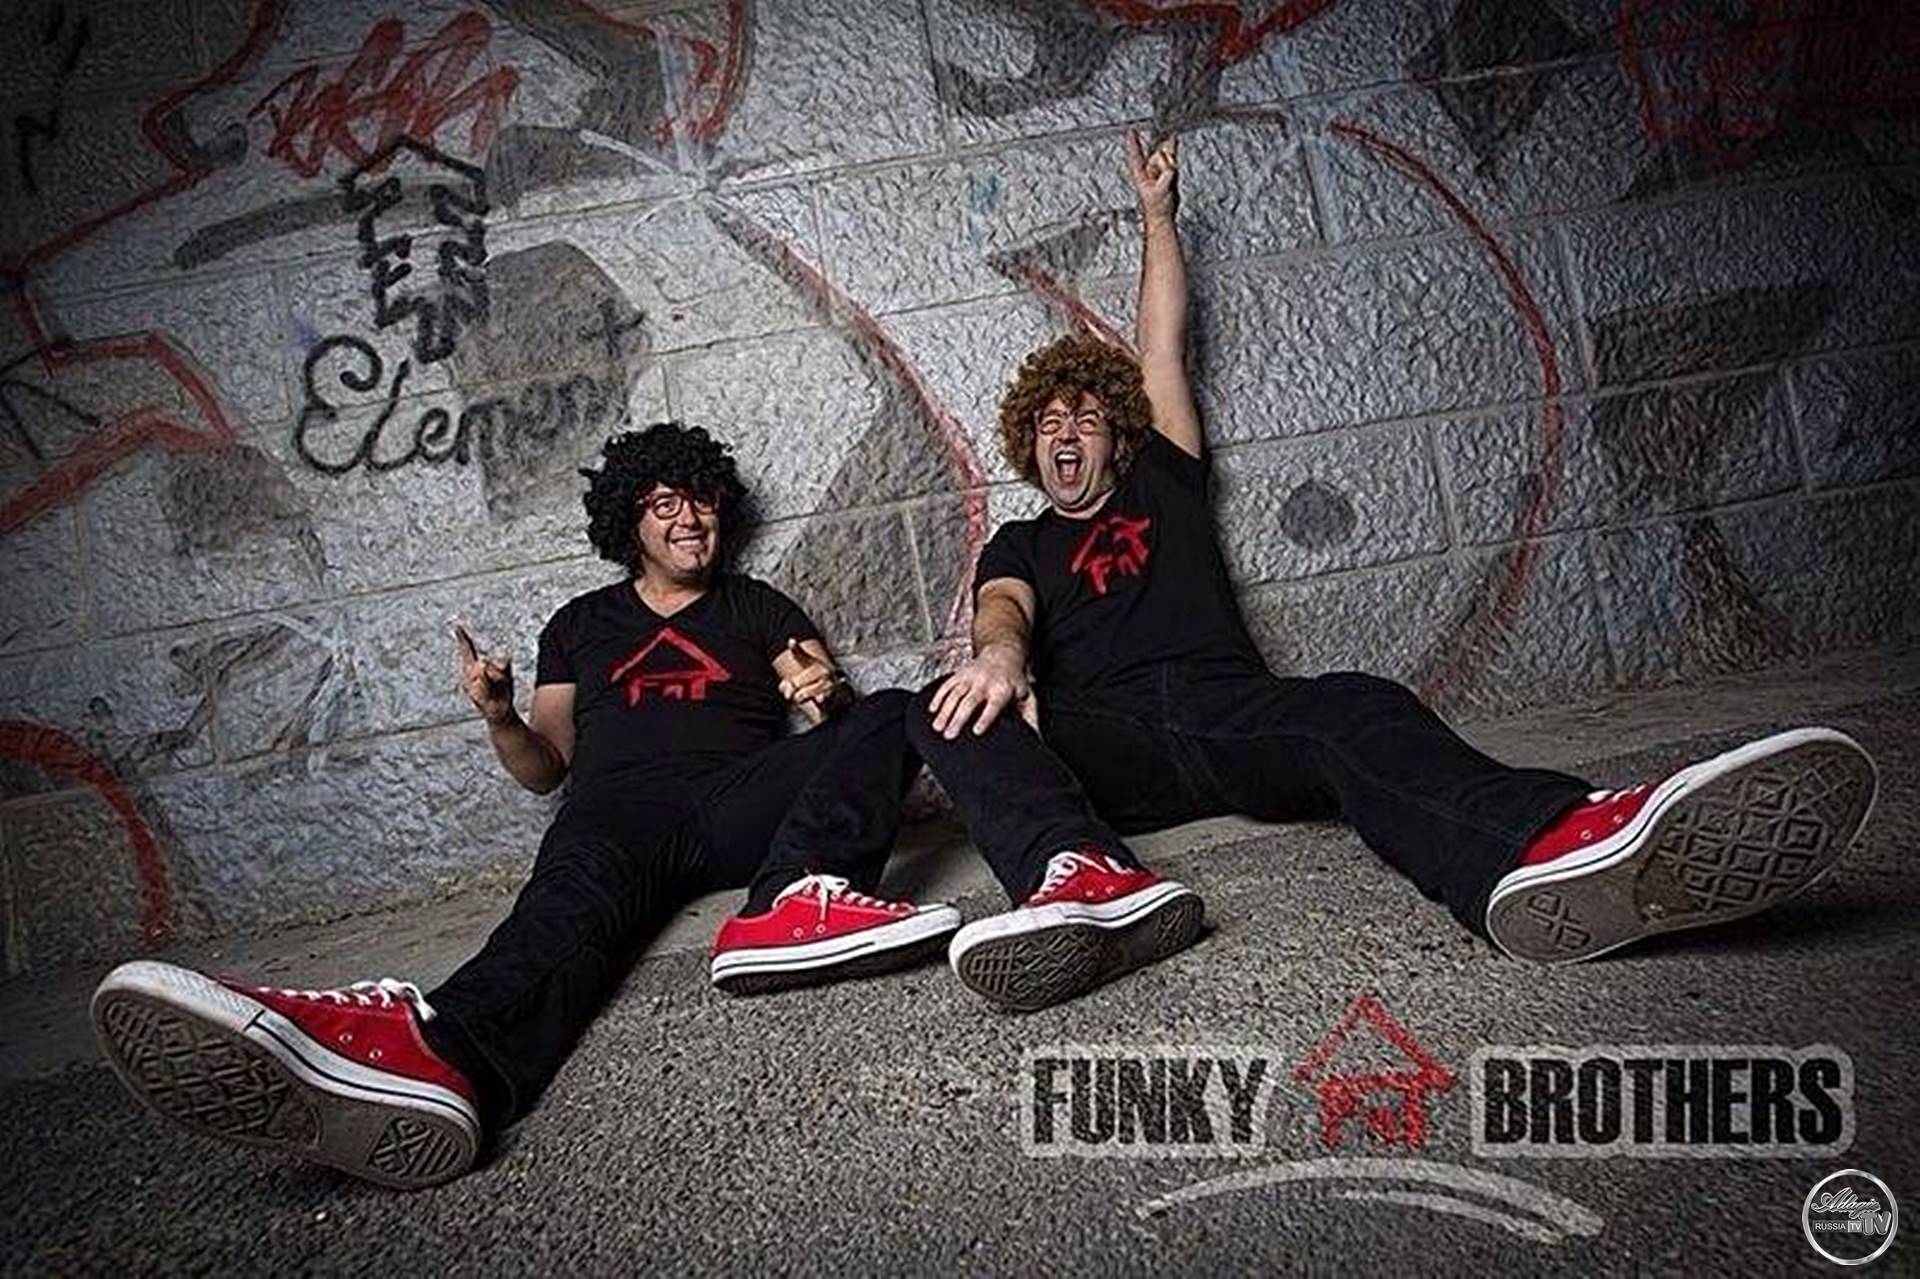 Funky House Brothers